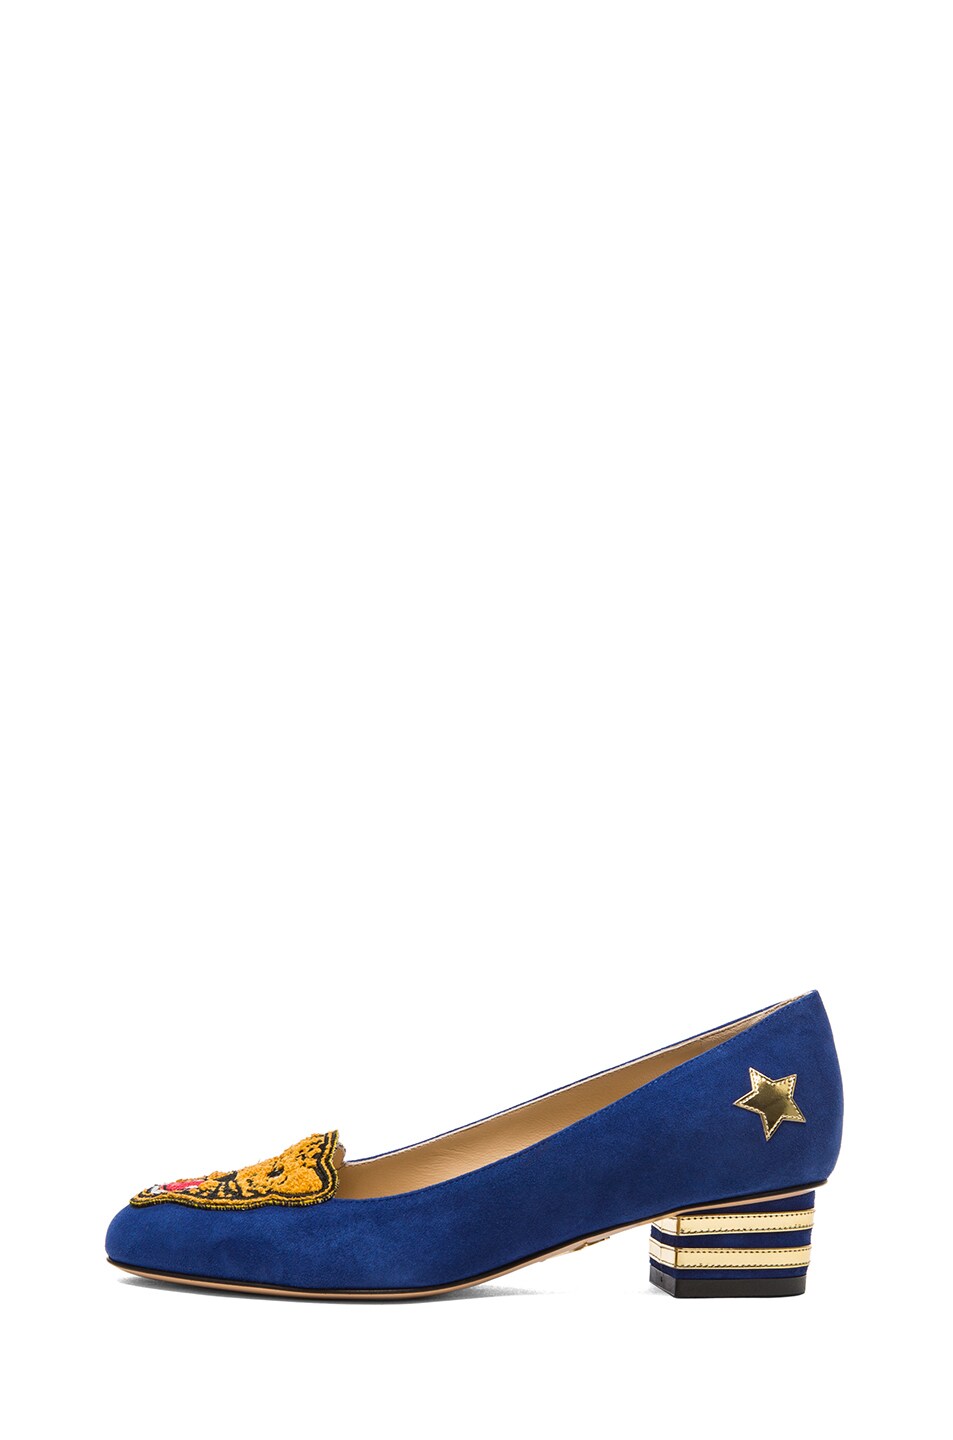 Image 1 of Charlotte Olympia Mascot Suede Heeled Flats in Varsity Blue